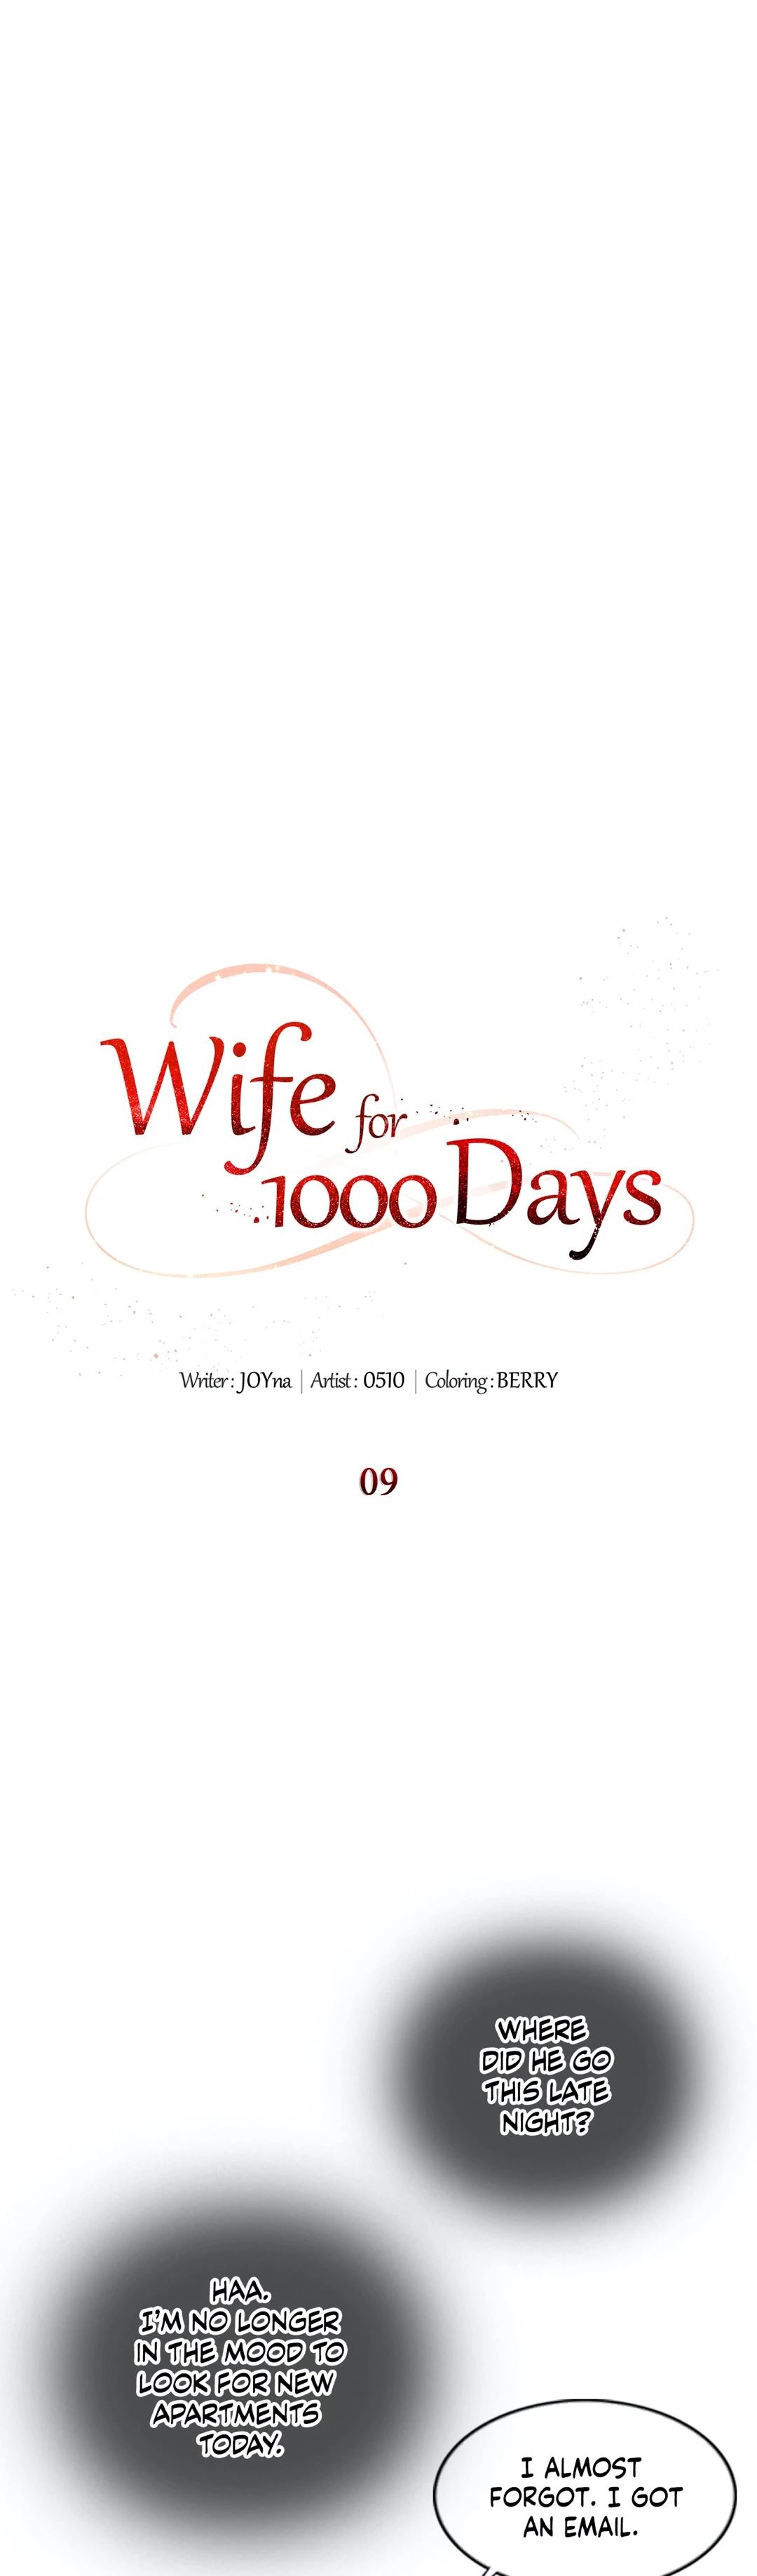 Wife for 1000 Days image